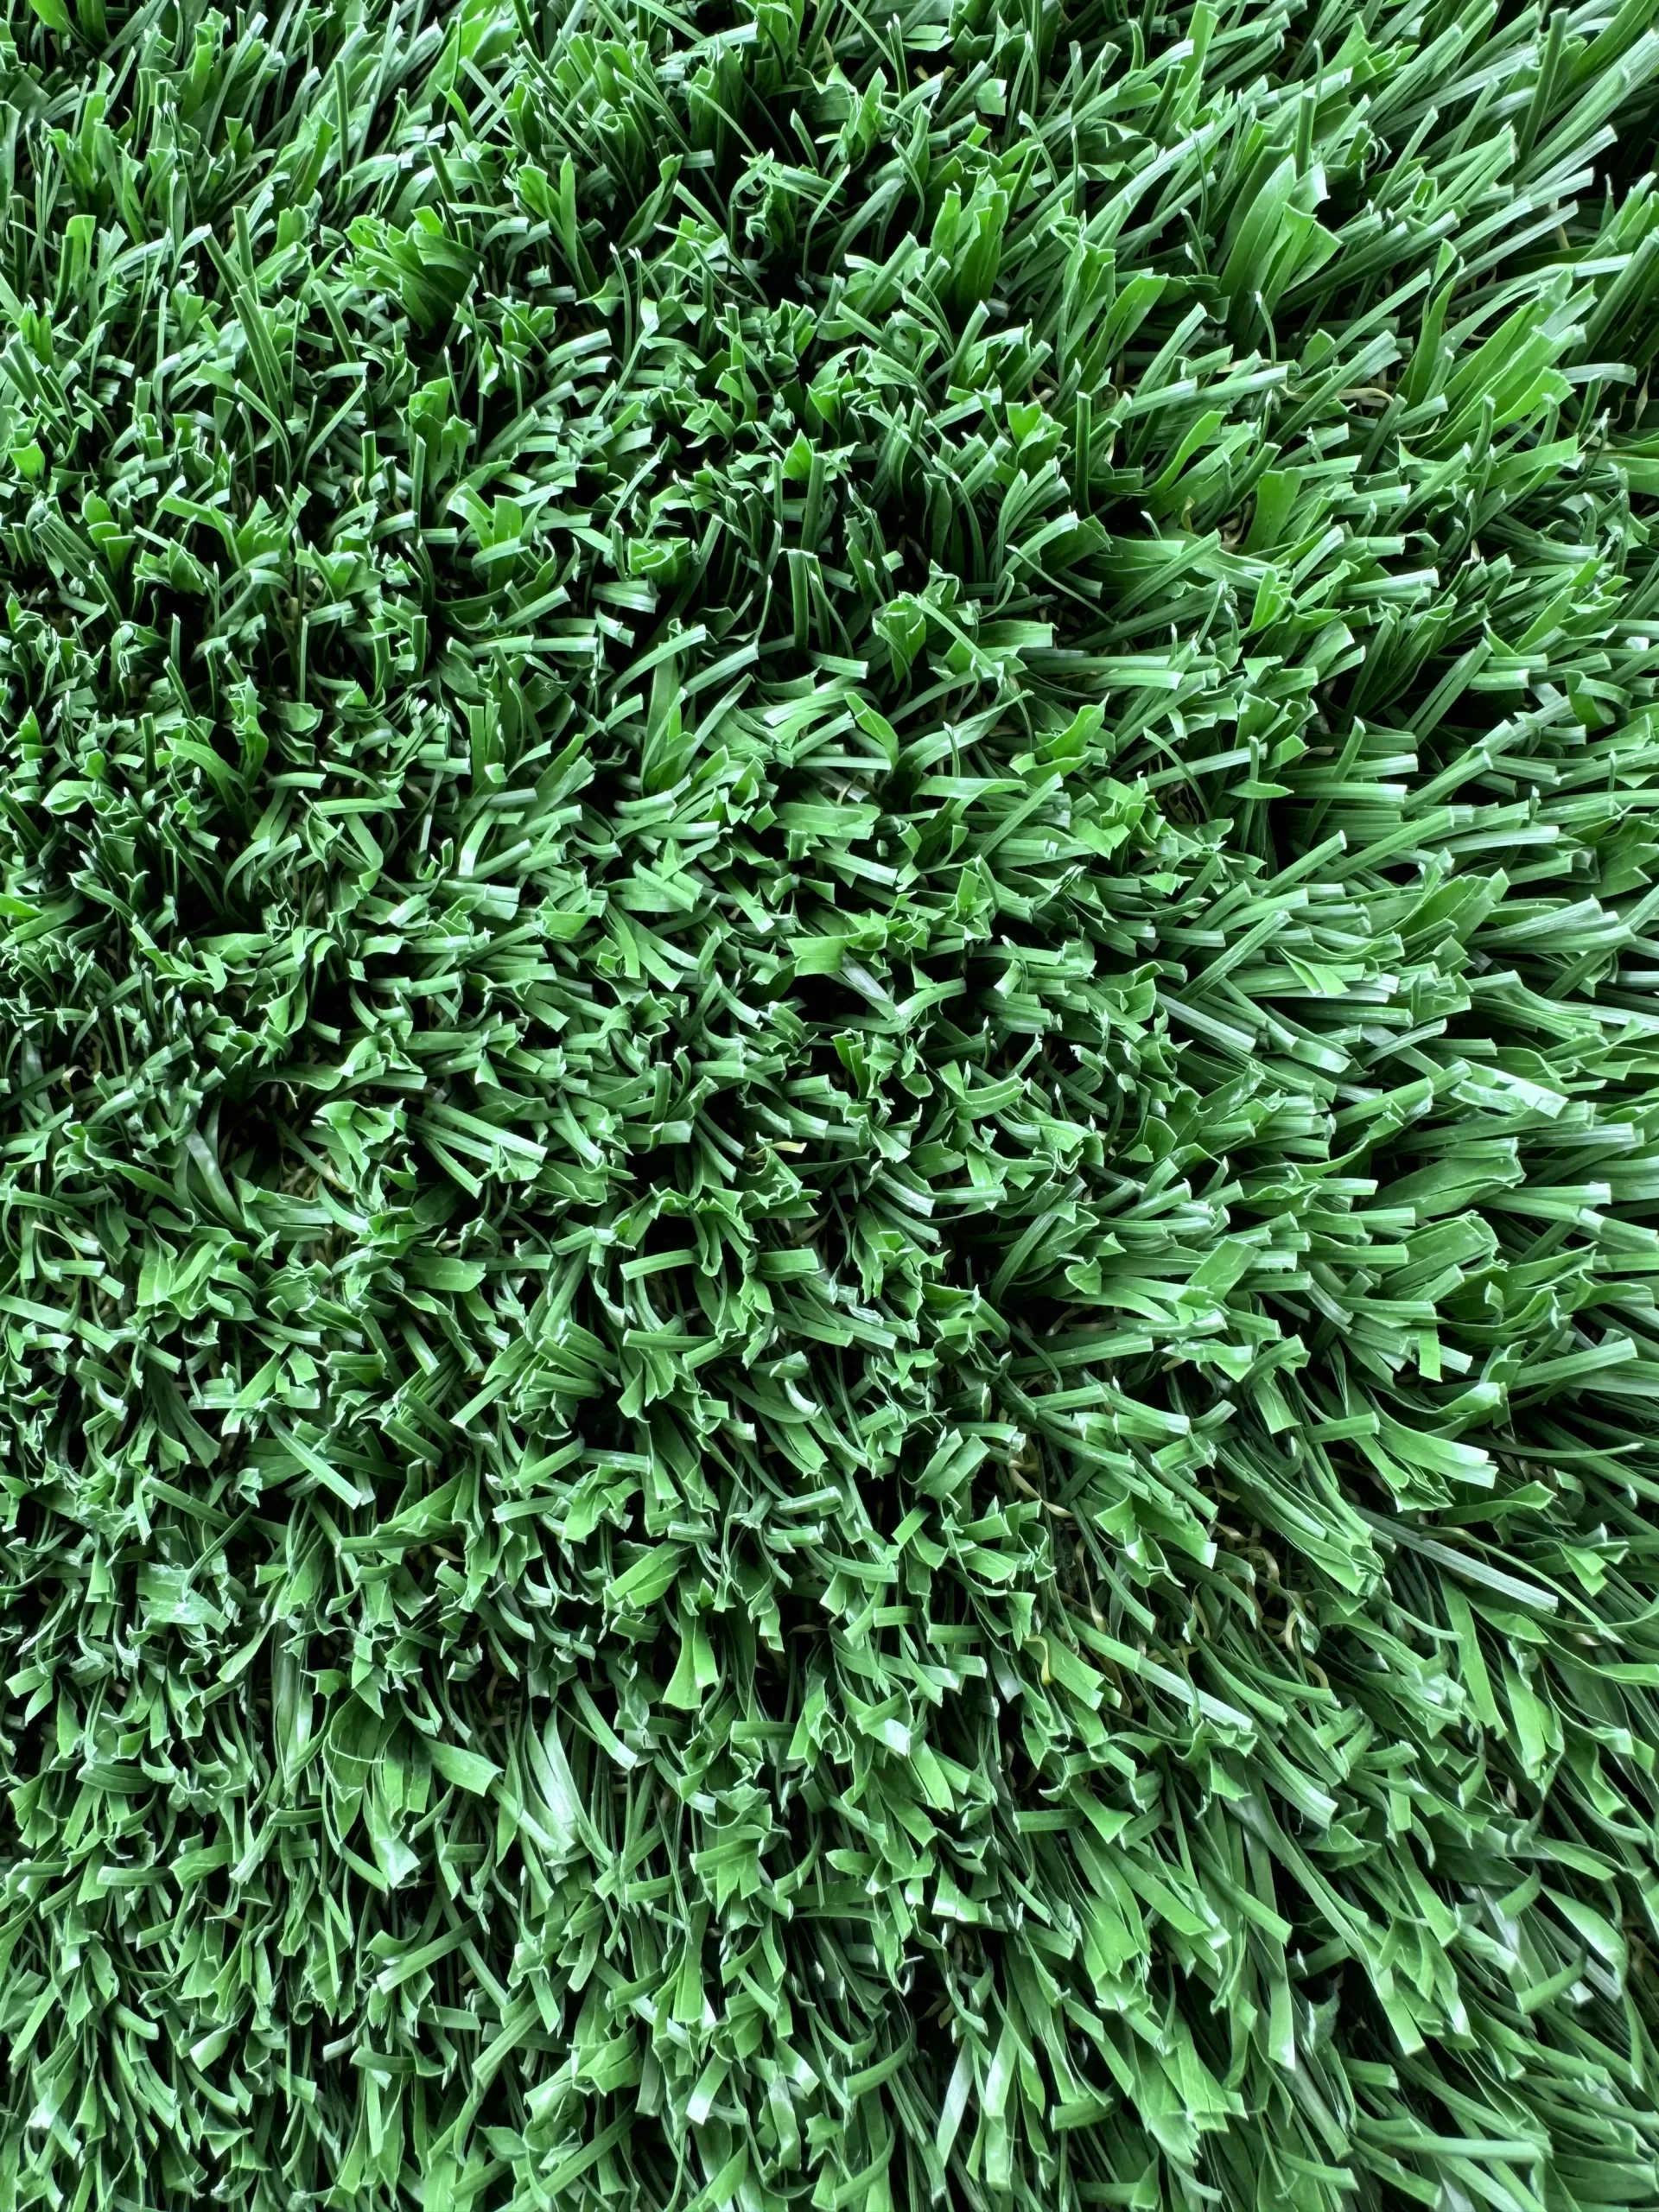 A close up, overhead view of bright green artificial turf.